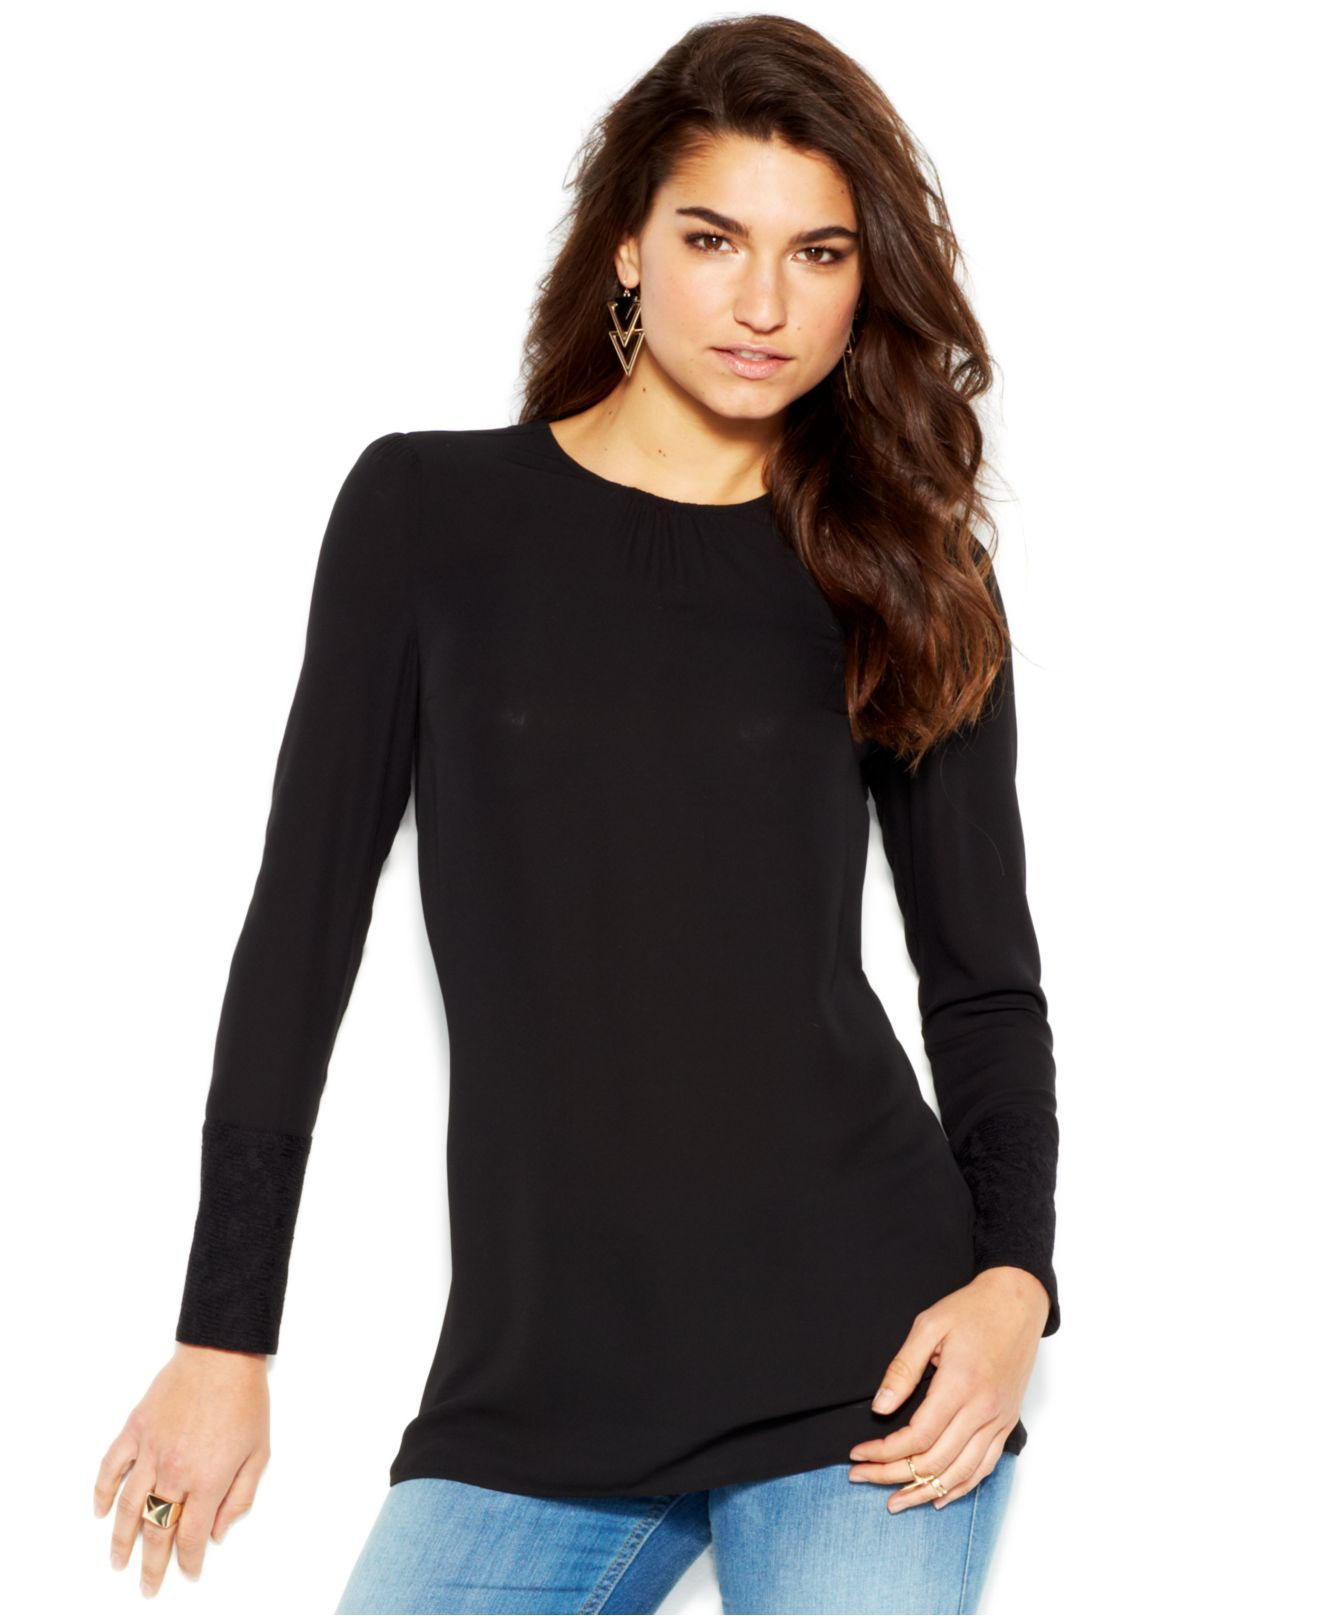 Lyst - Guess Long-Sleeve Open-Back Tunic Top in Black